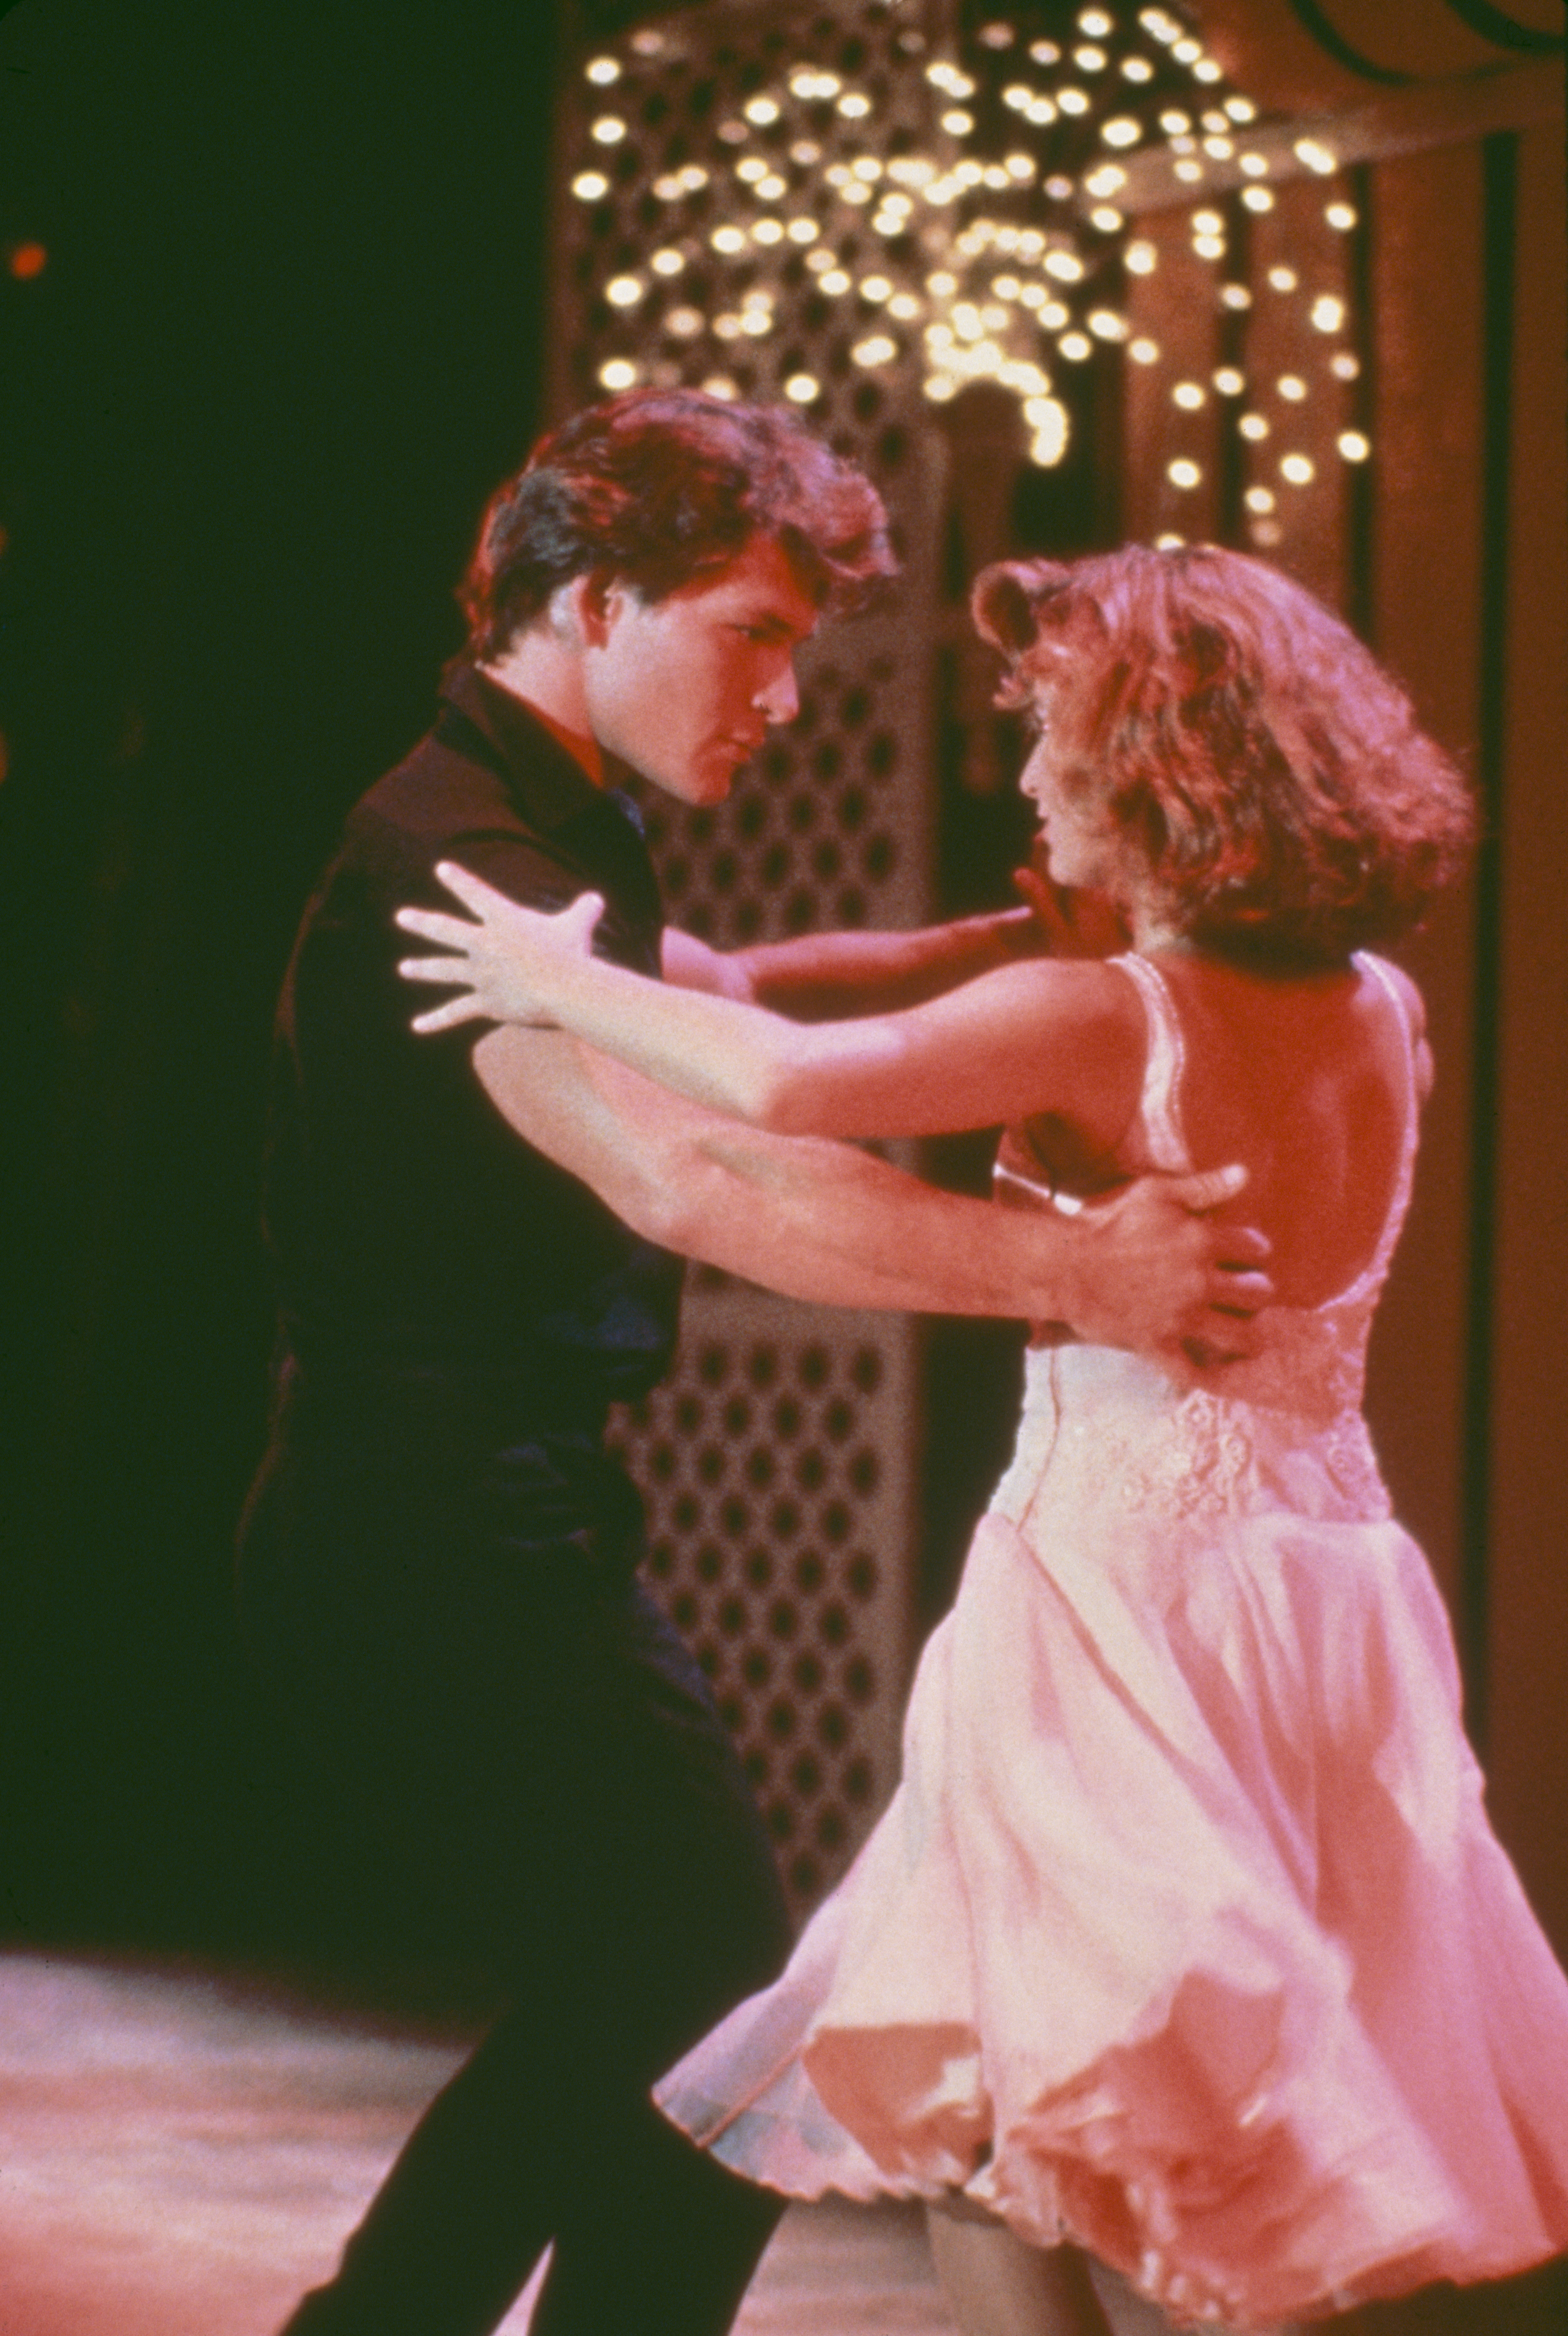 Jennifer Grey and Patrick Swayze in the film "Dirty Dancing" in 1987 | Source: Getty Images